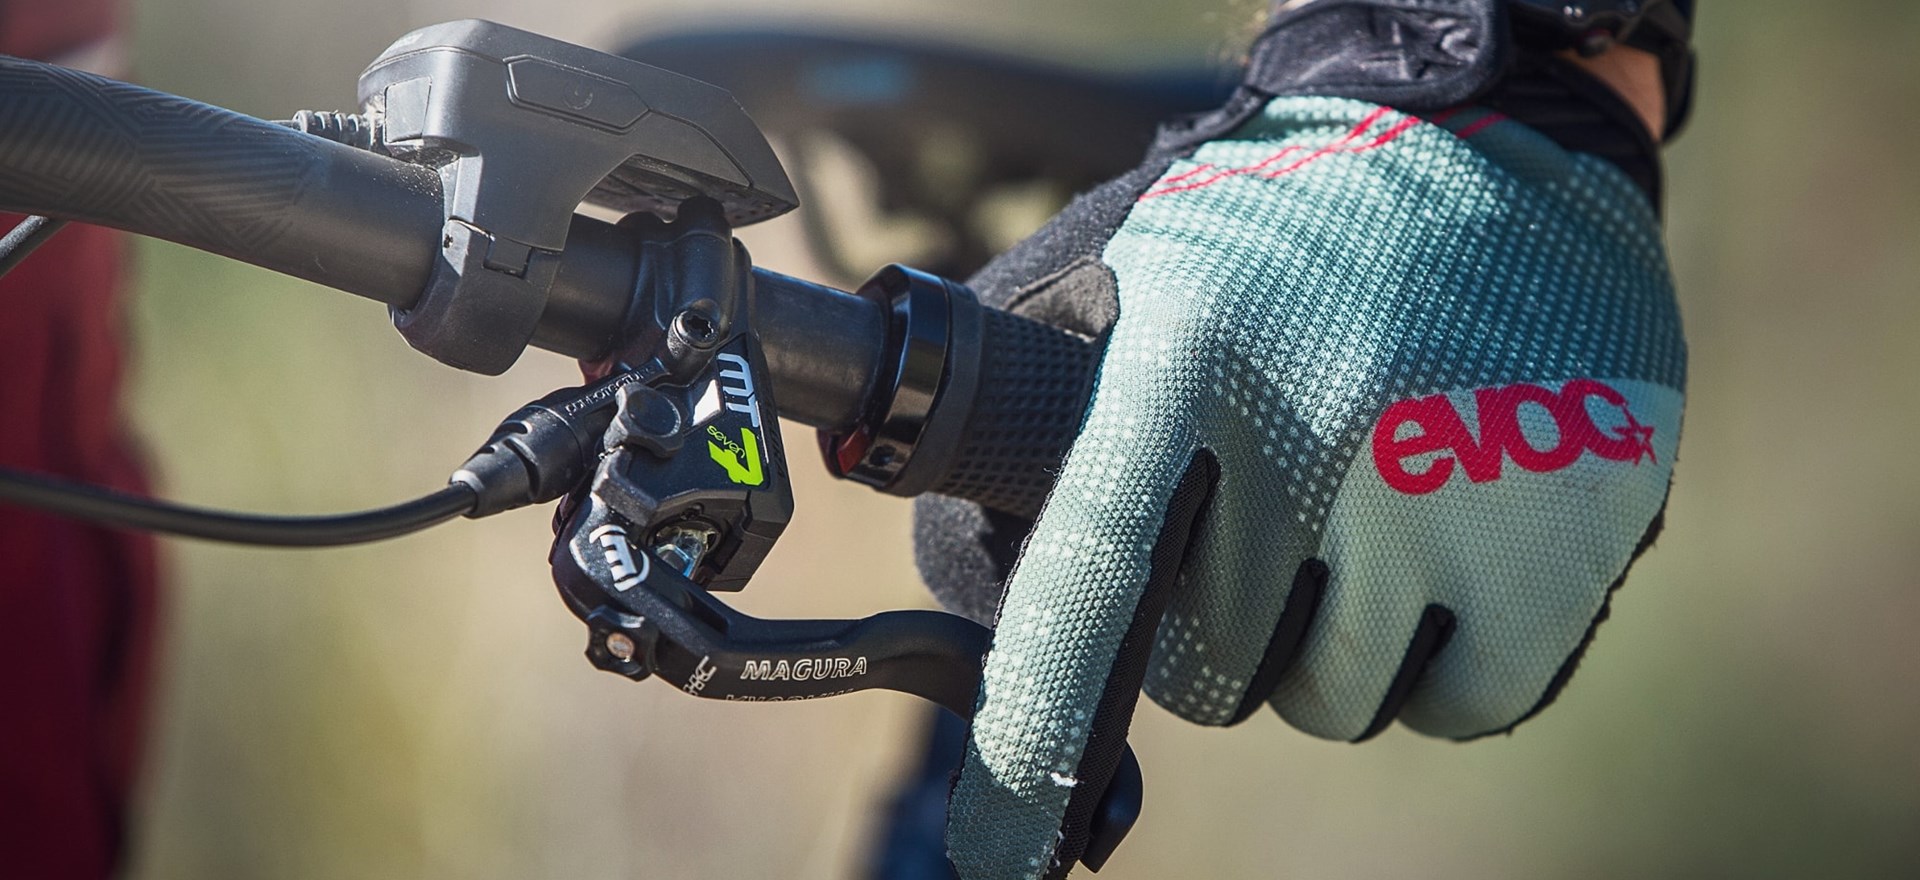 Magura MT7 PRO - Crush the competition with world champion's brakes!